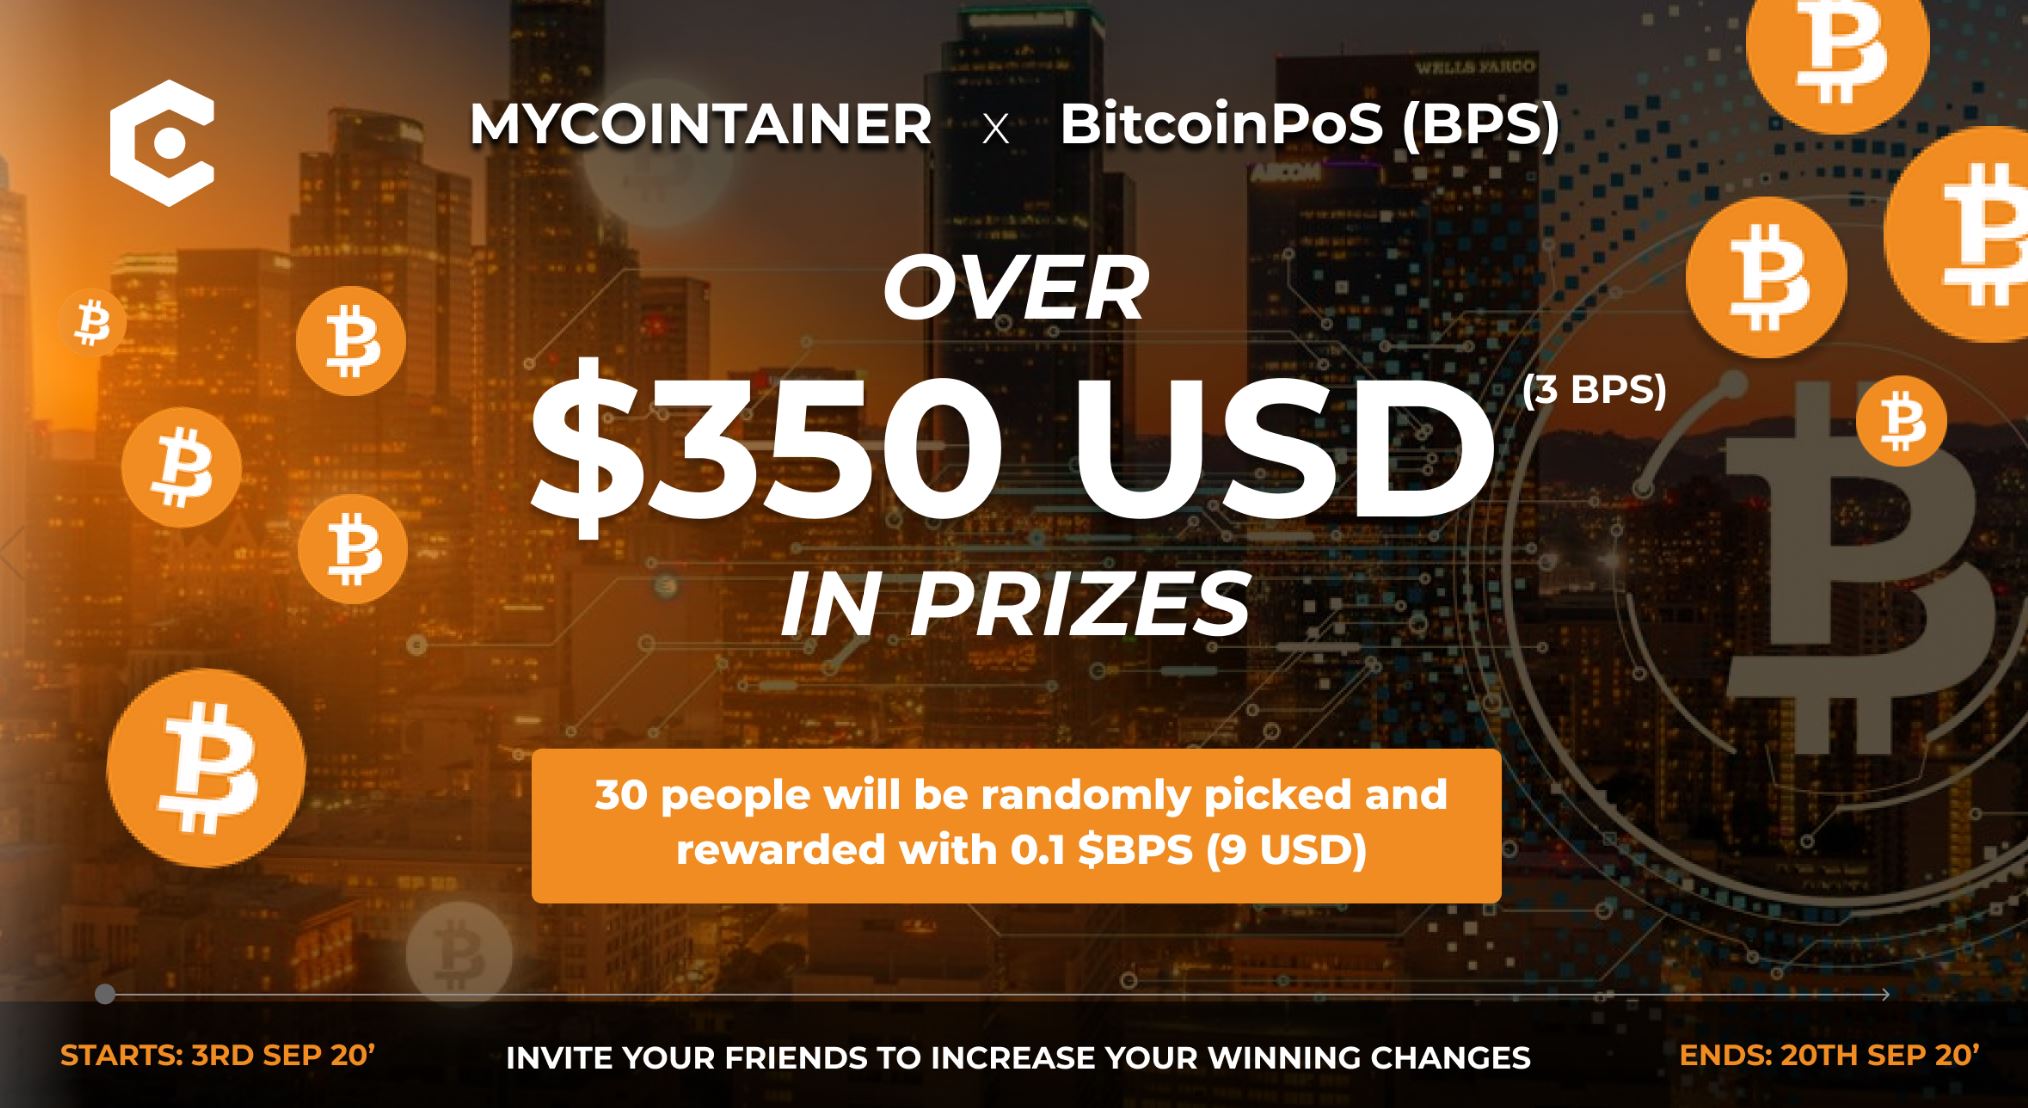 MyCoinTainer x BitcoinPoS Giveaway